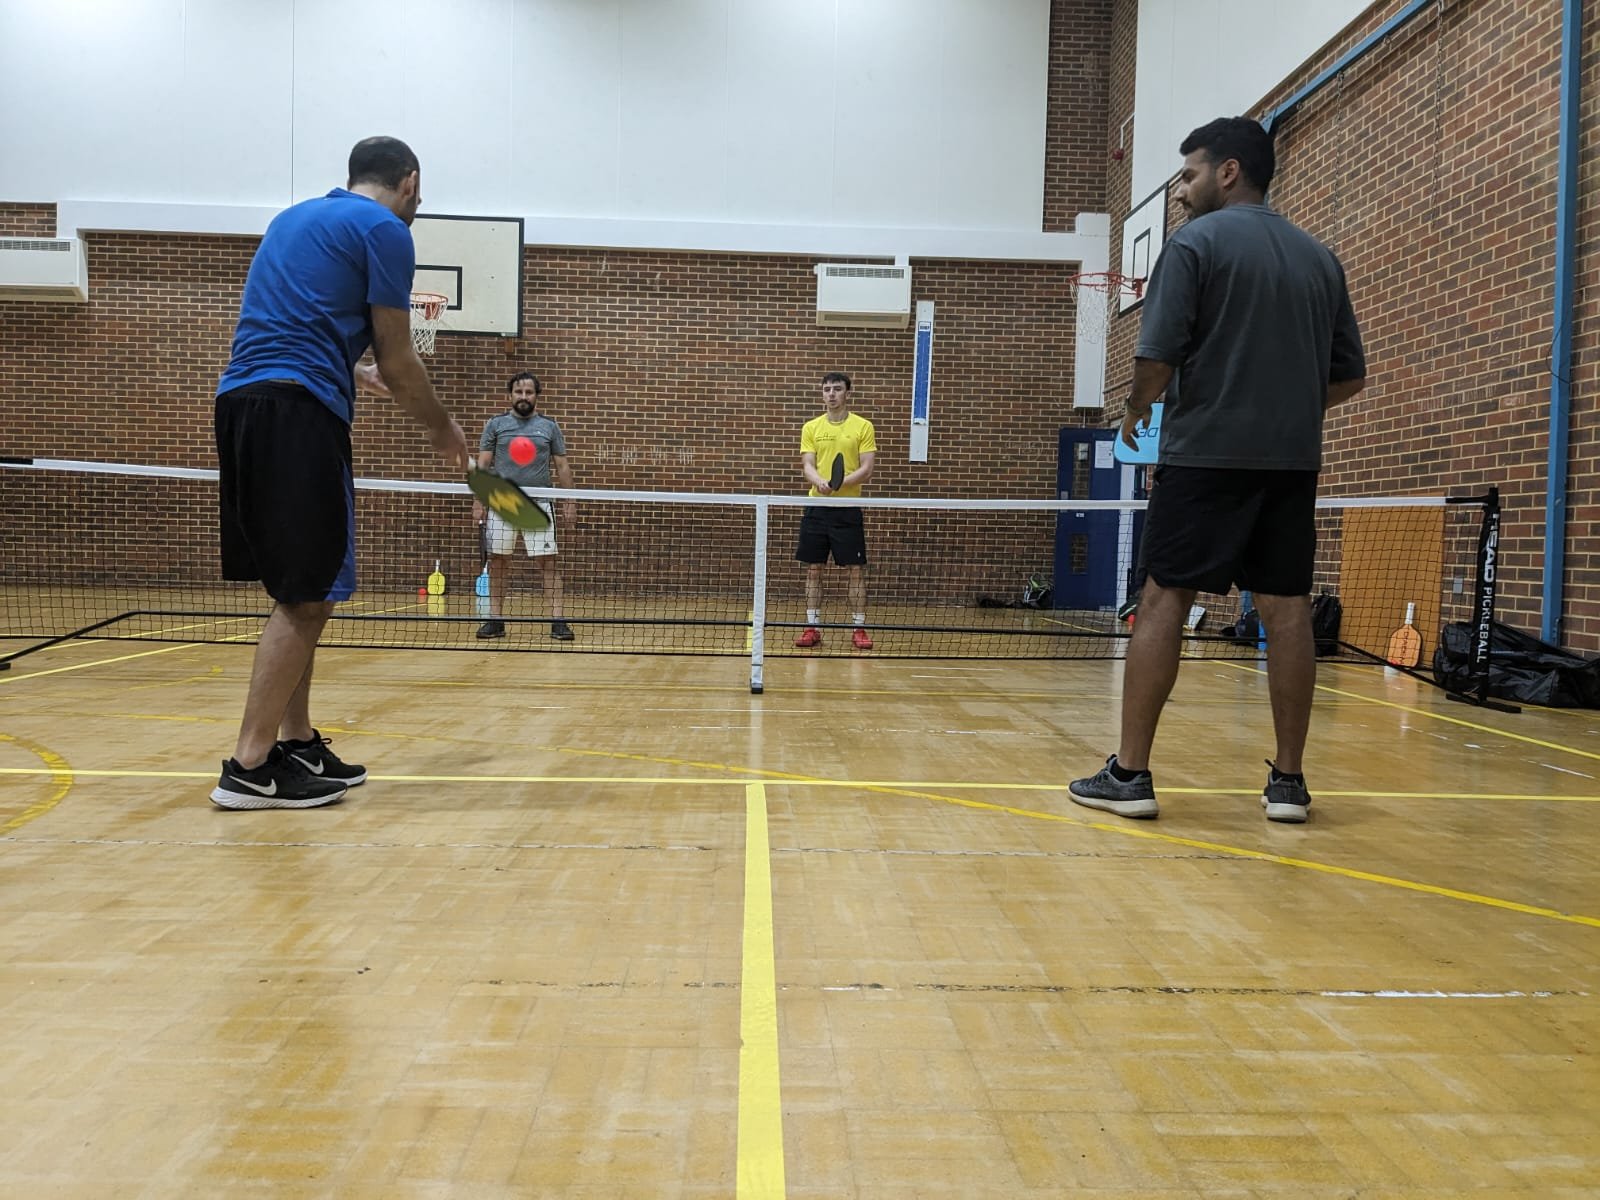 Four players at Lemon Pickleball working on their dink shot and punch volley in North London